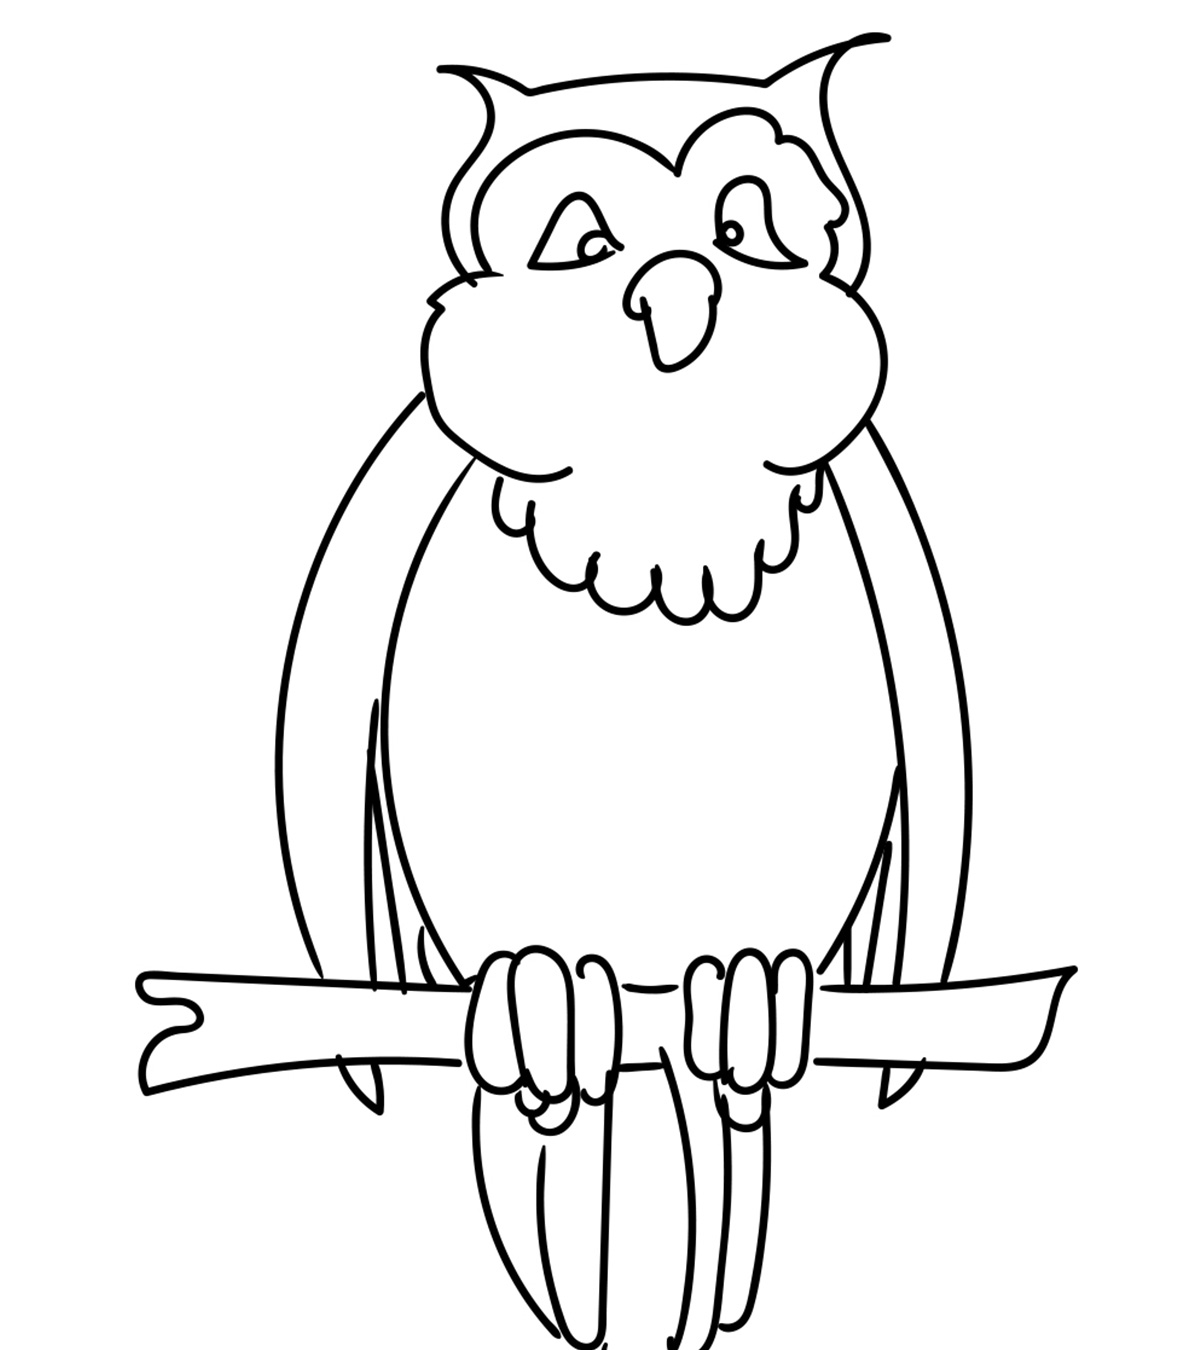 Top 25 Owl Coloring Pages Your Toddler Will Love To Color